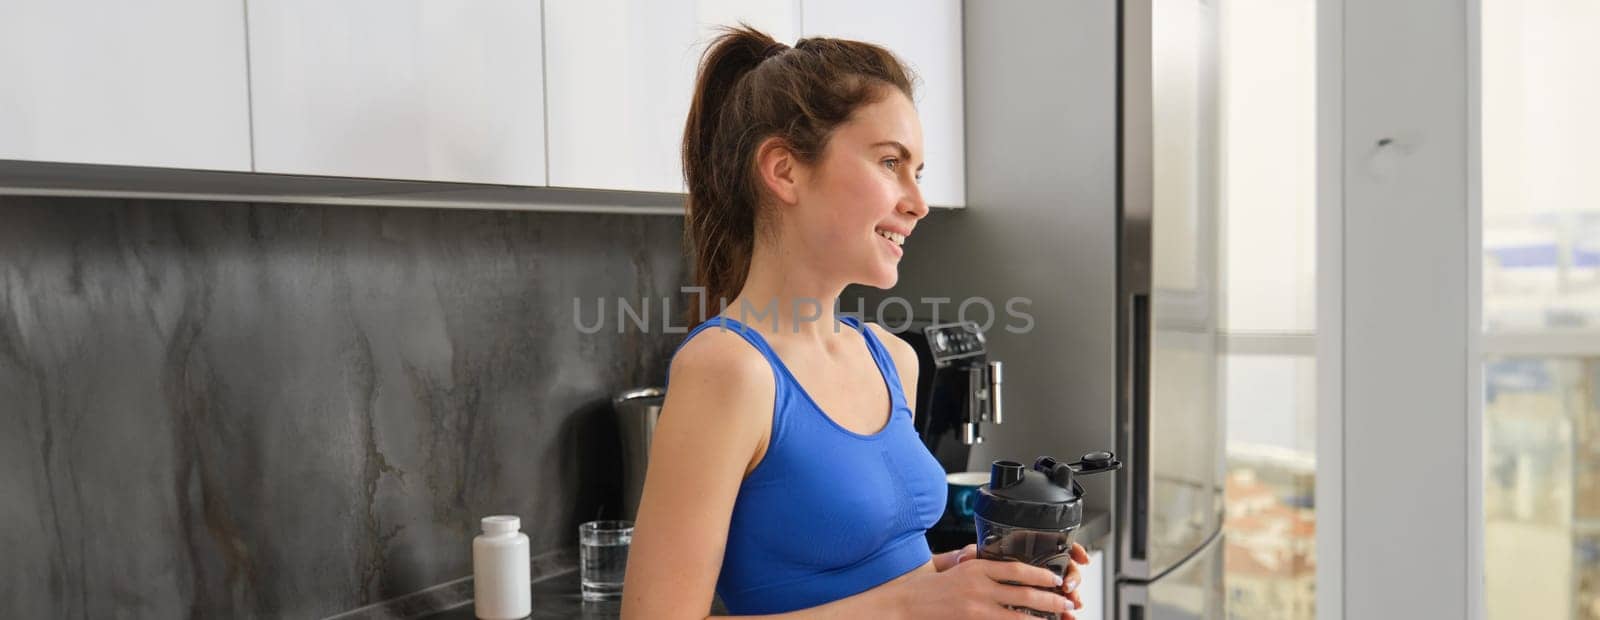 Fitness woman standing with black water bottle in kitchen, wearing workout clothing, drinking after yoga exercises.